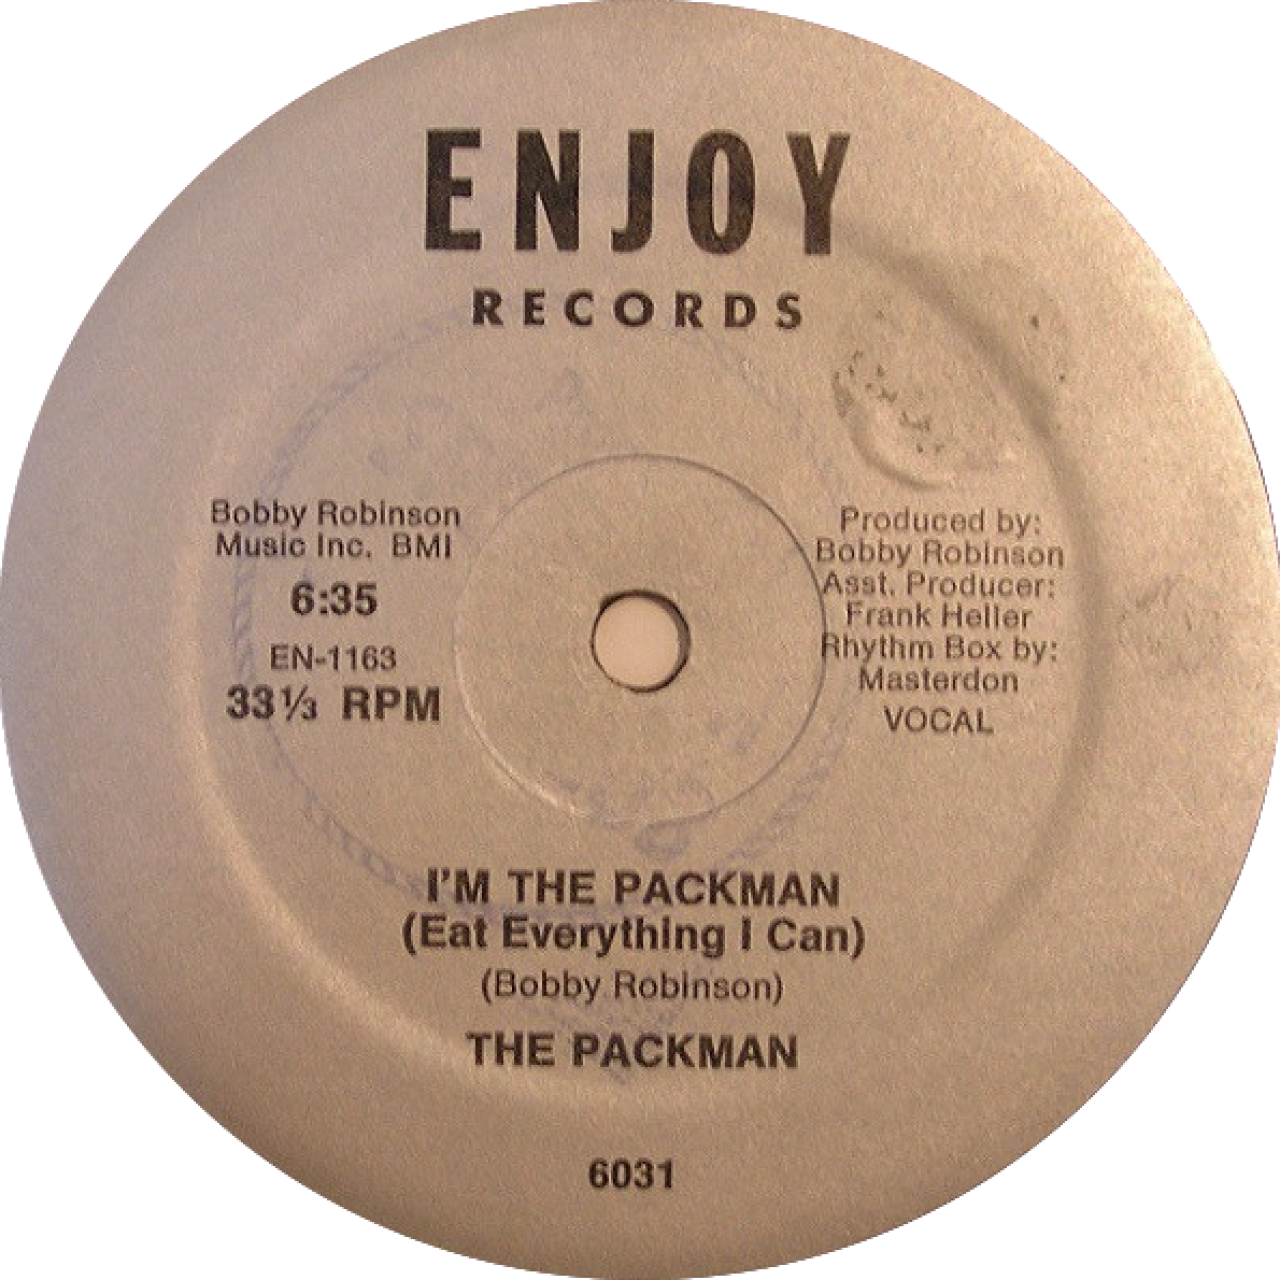 The Packman - I'm the Packman